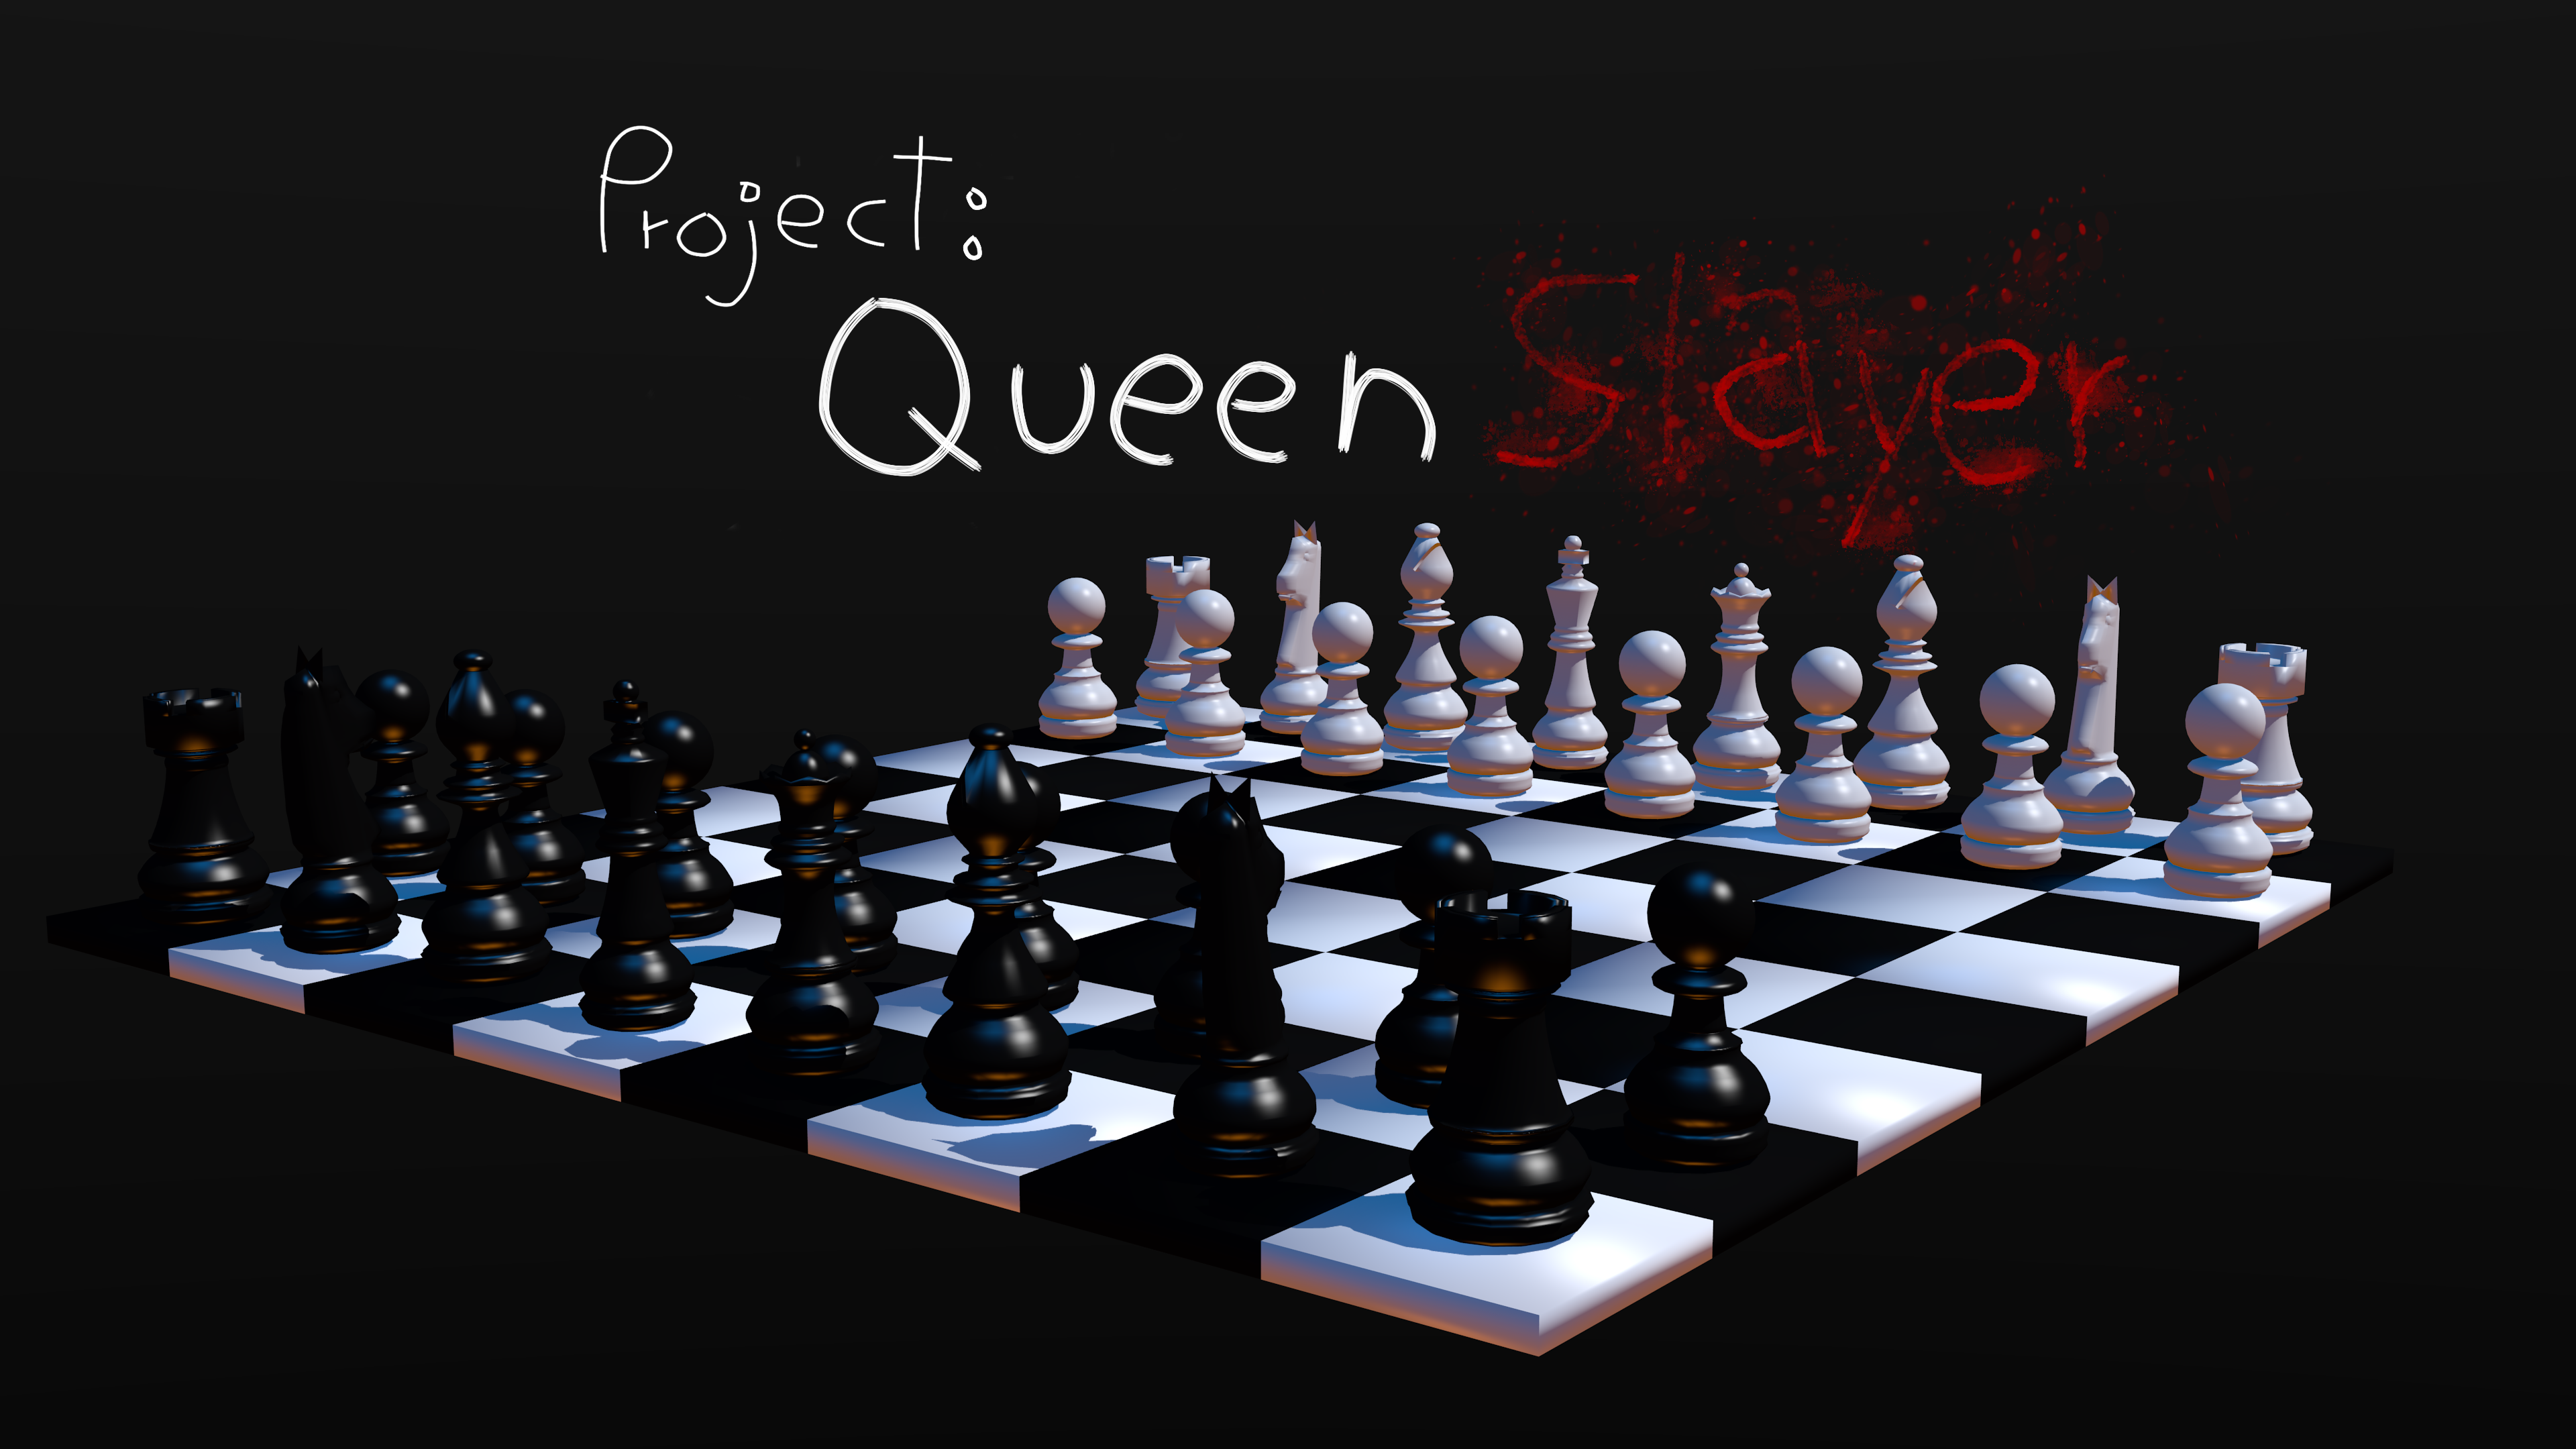 Project Queen Slayer